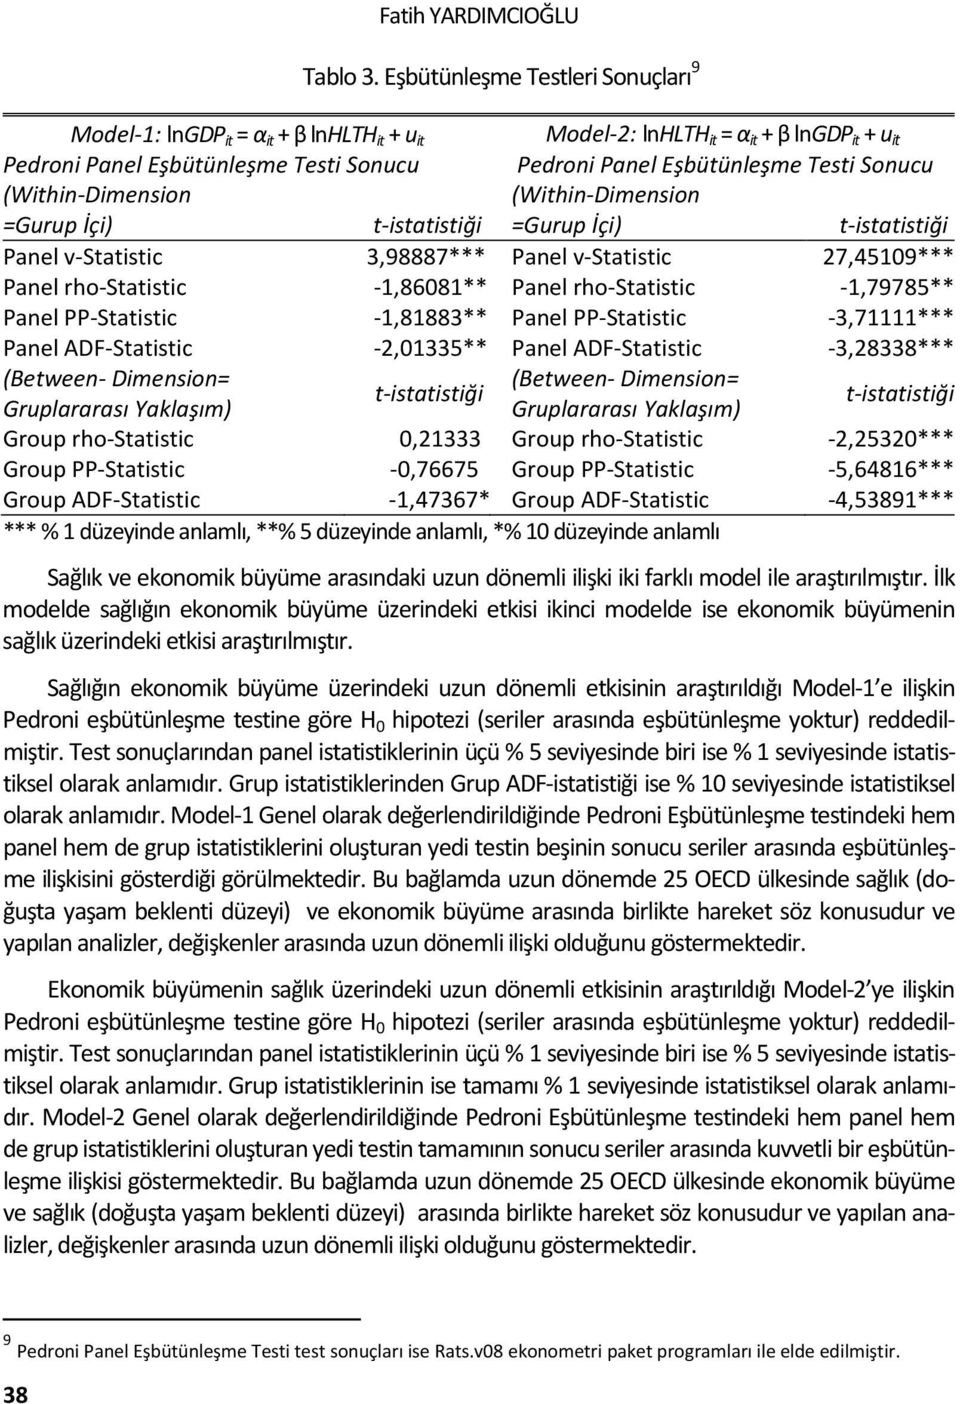 Sonucu (Within-Dimension (Within-Dimension =Gurup İçi) t-istatistiği =Gurup İçi) t-istatistiği Panel v-statistic 3,98887*** Panel v-statistic 27,45109*** Panel rho-statistic -1,86081** Panel